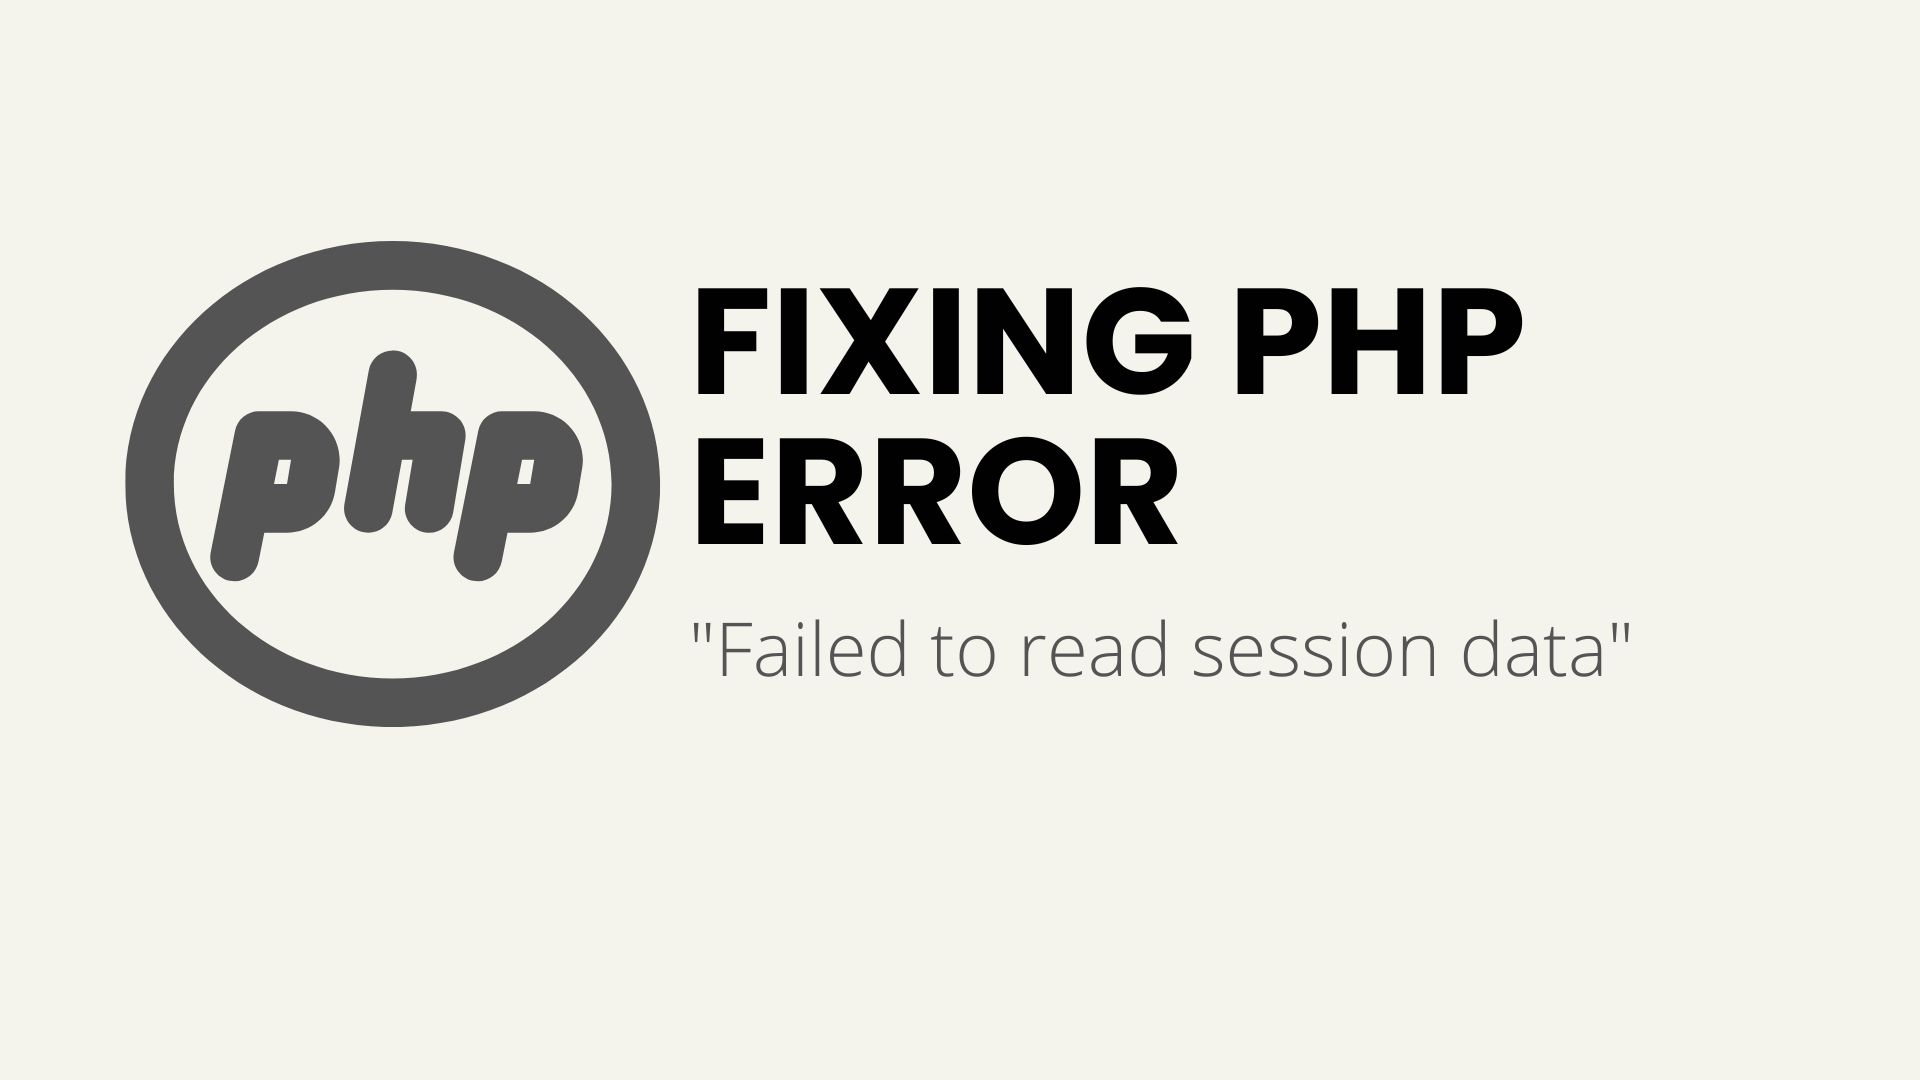 How to fix PHP error “failed to read session data”